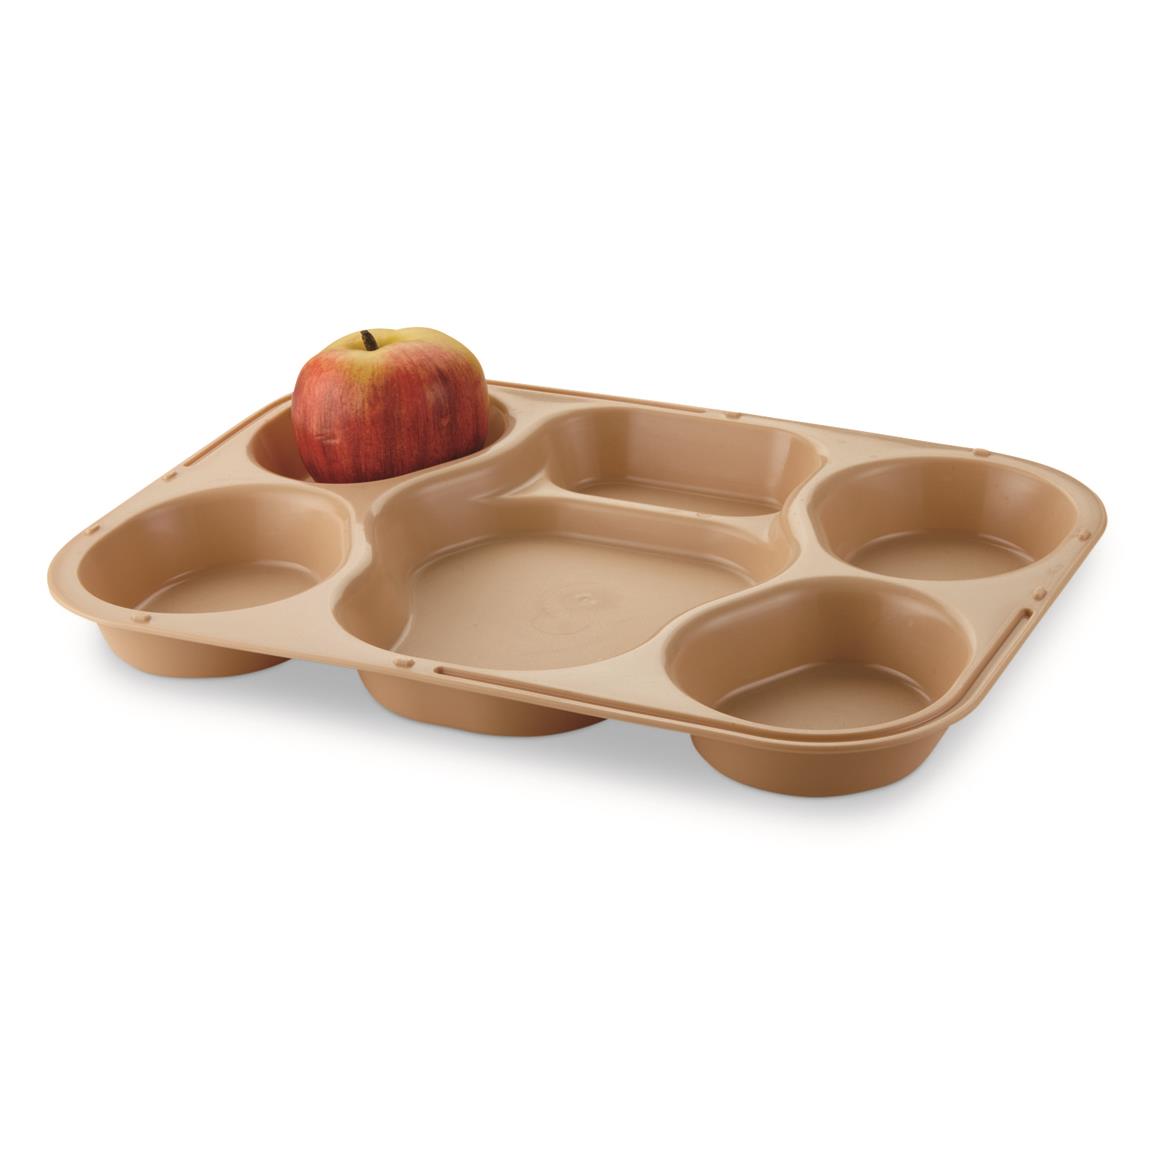 U.S. Military Surplus 6 Compartment Mess Tray, 2 pack, New